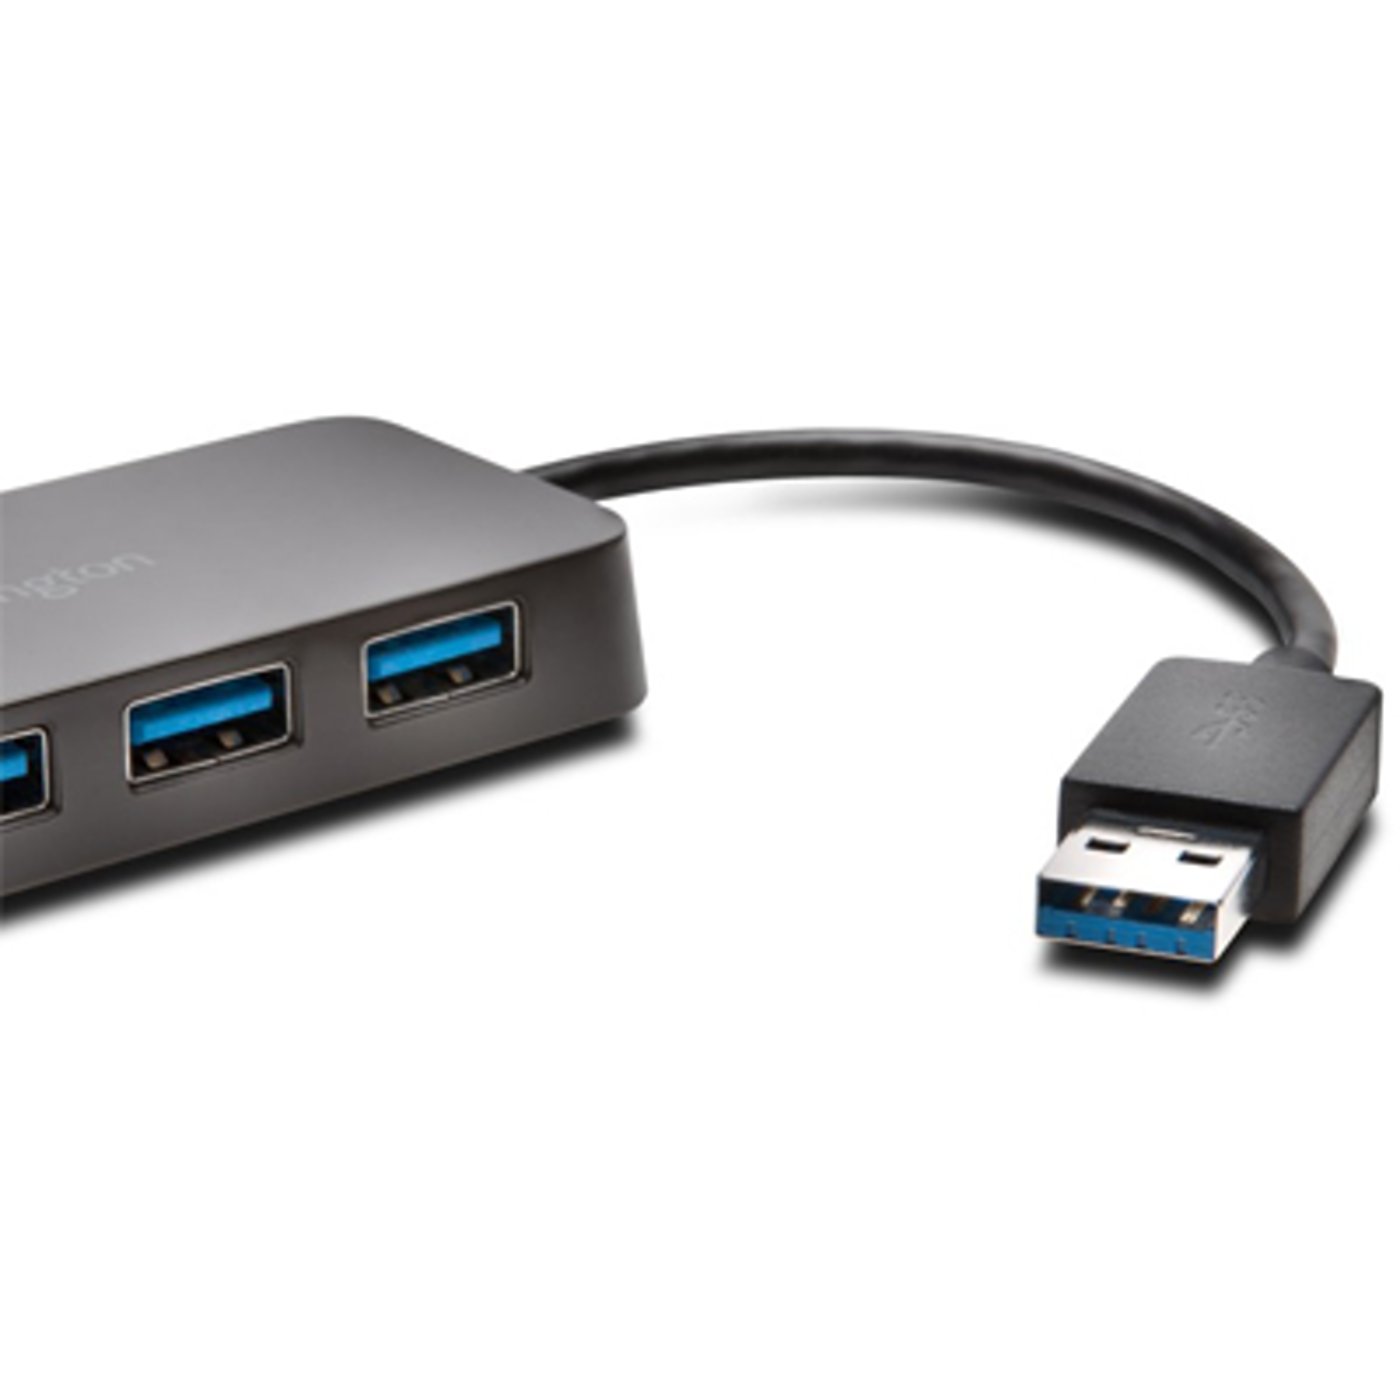 Kensington - Products - Connectivity - USB Hubs & Adapters - UH4000 ...